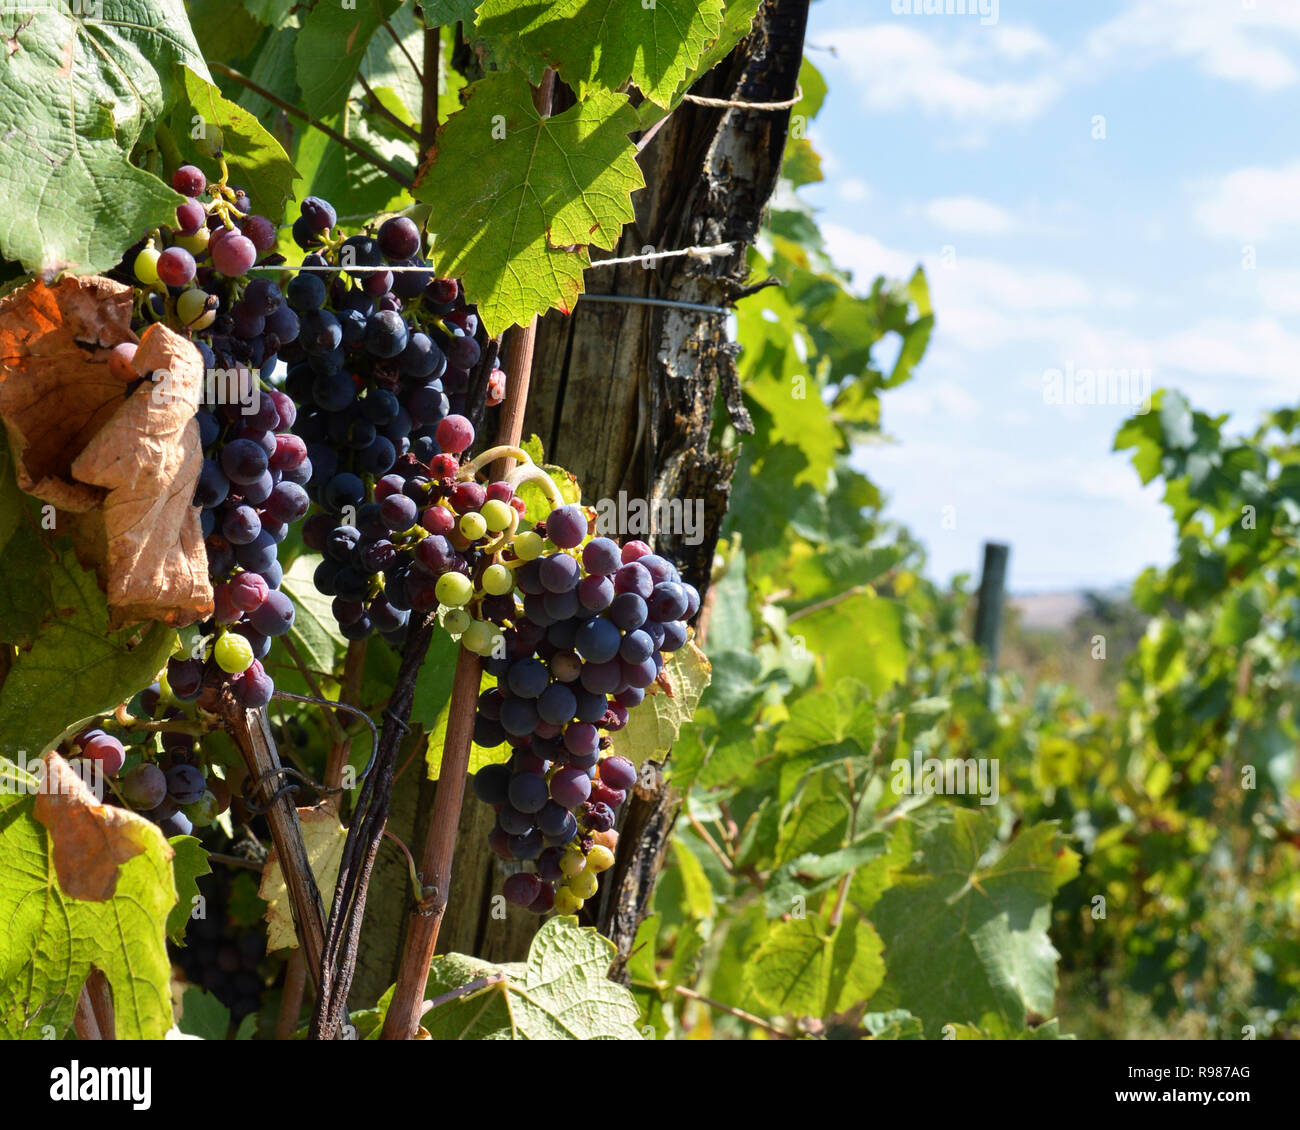 A vineyard plot to make wine with grapes. Viticulture agriculture Stock Photo